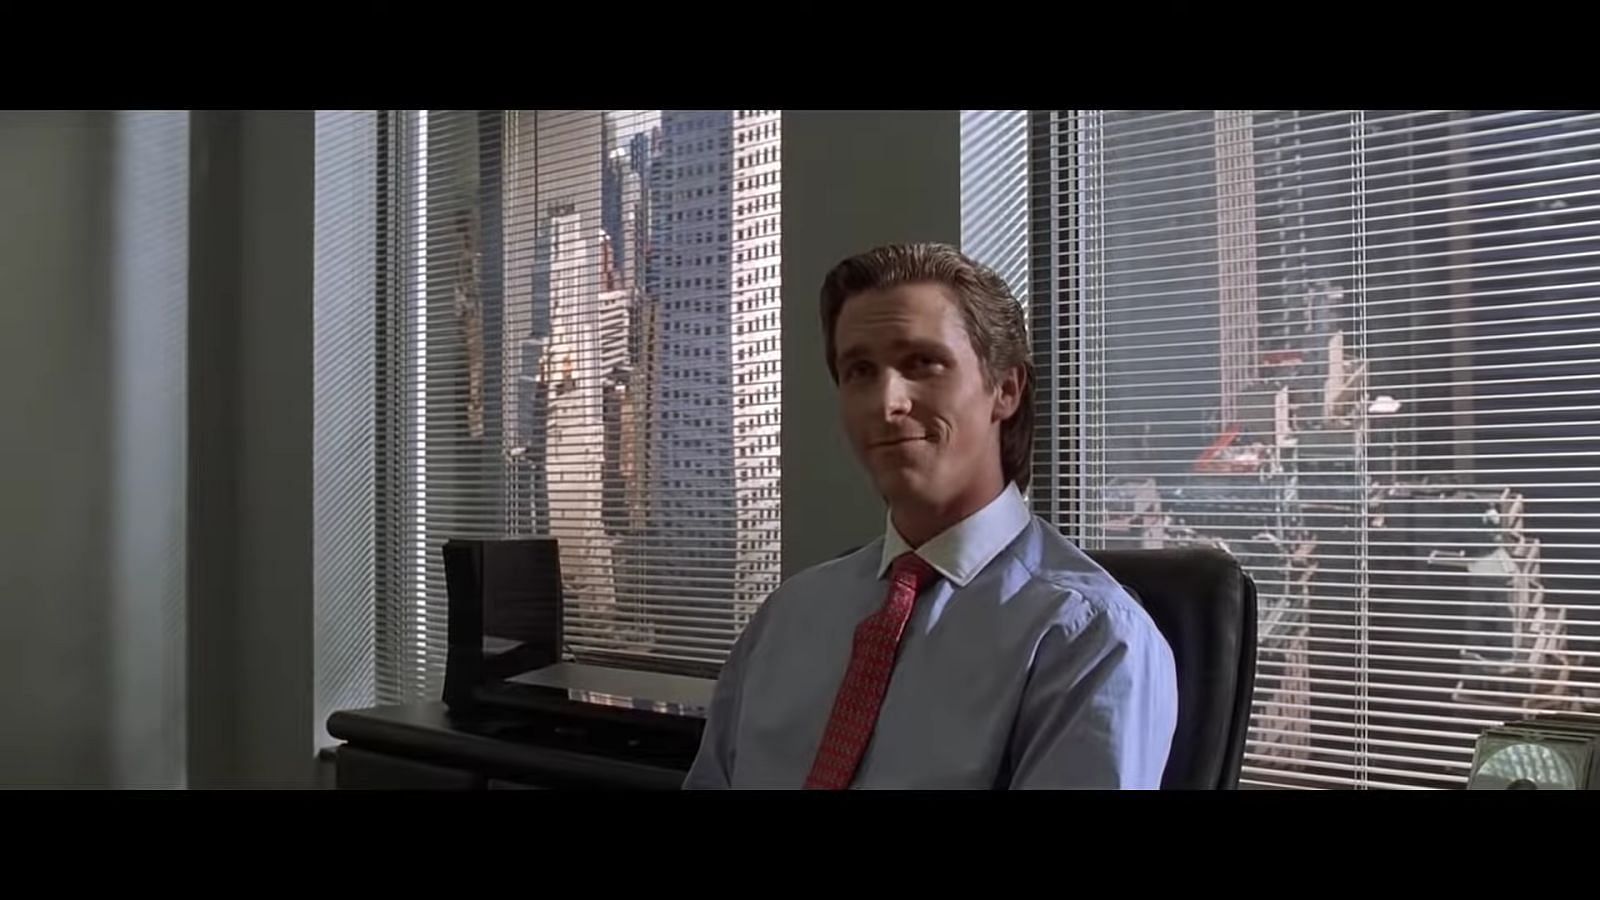 American Psycho' Cast Then, Now: Christian Bale, Jared Leto, More